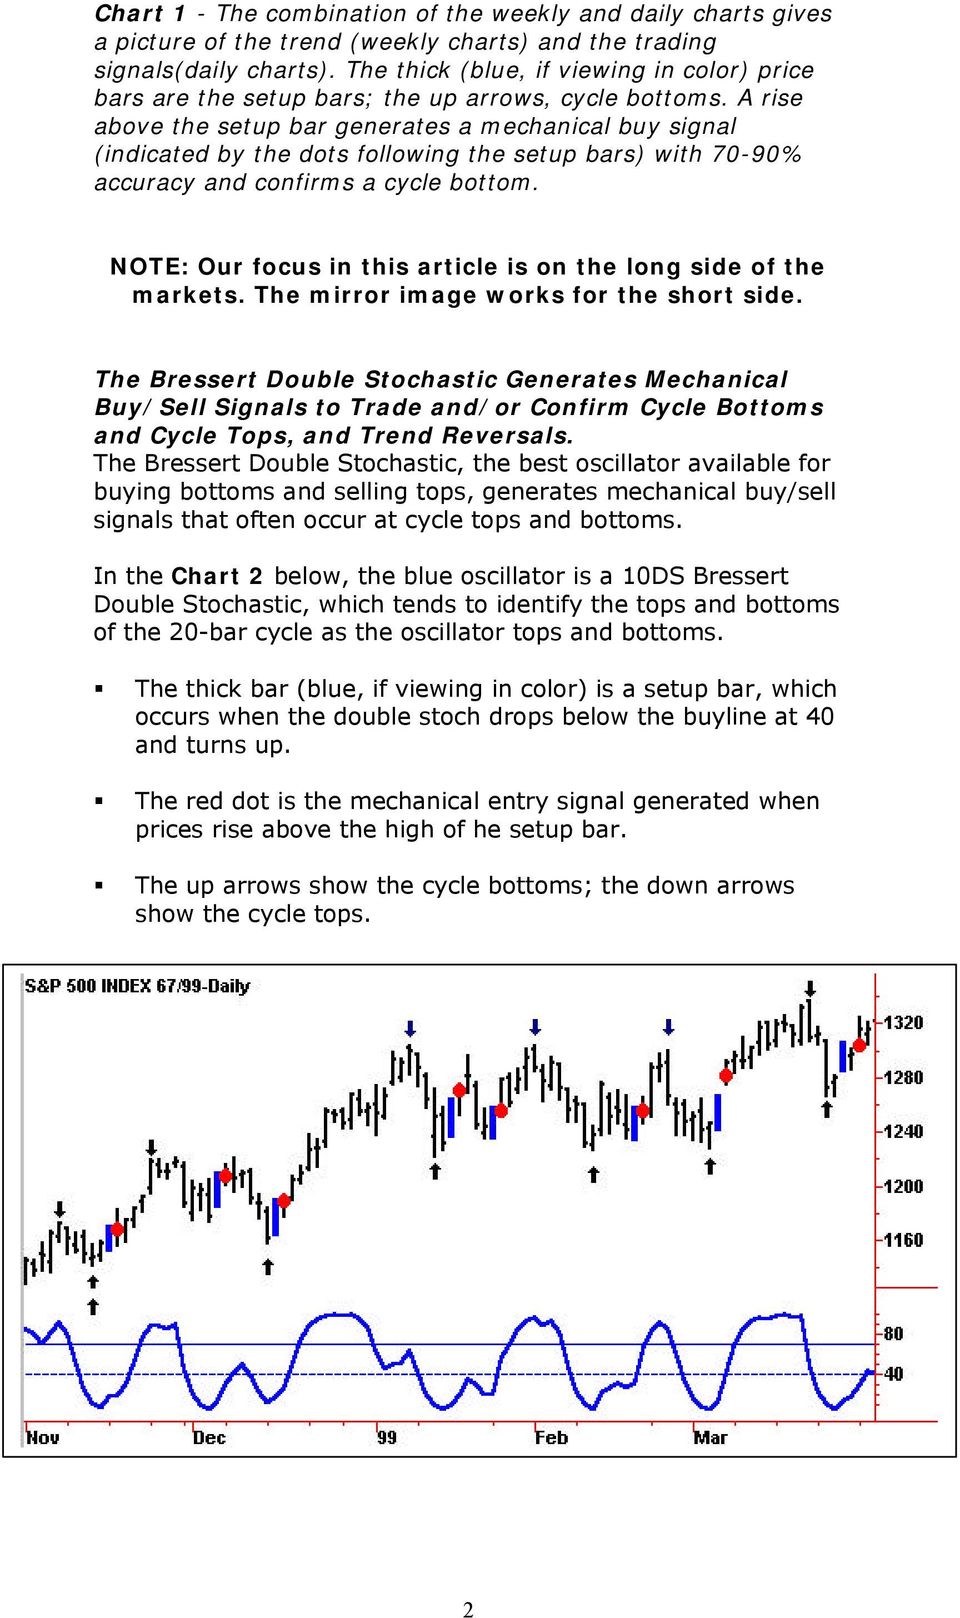 A rise above the setup bar generates a mechanical buy signal (indicated by the dots following the setup bars) with 70-90% accuracy and confirms a cycle bottom.